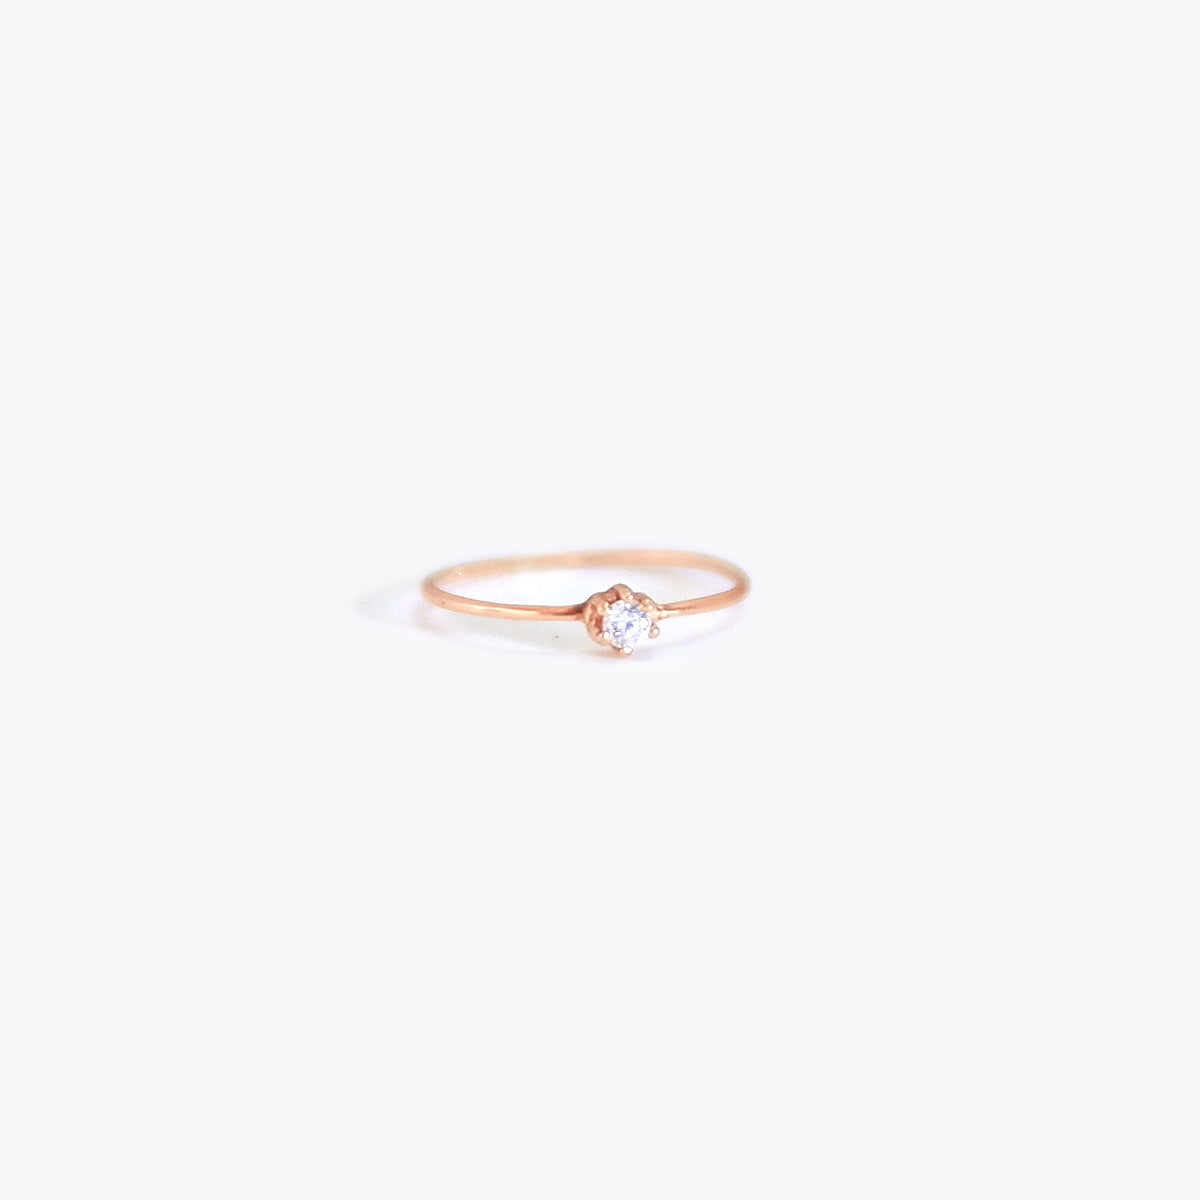 The Tiny Solitaire Birthstone Ring in Solid Gold